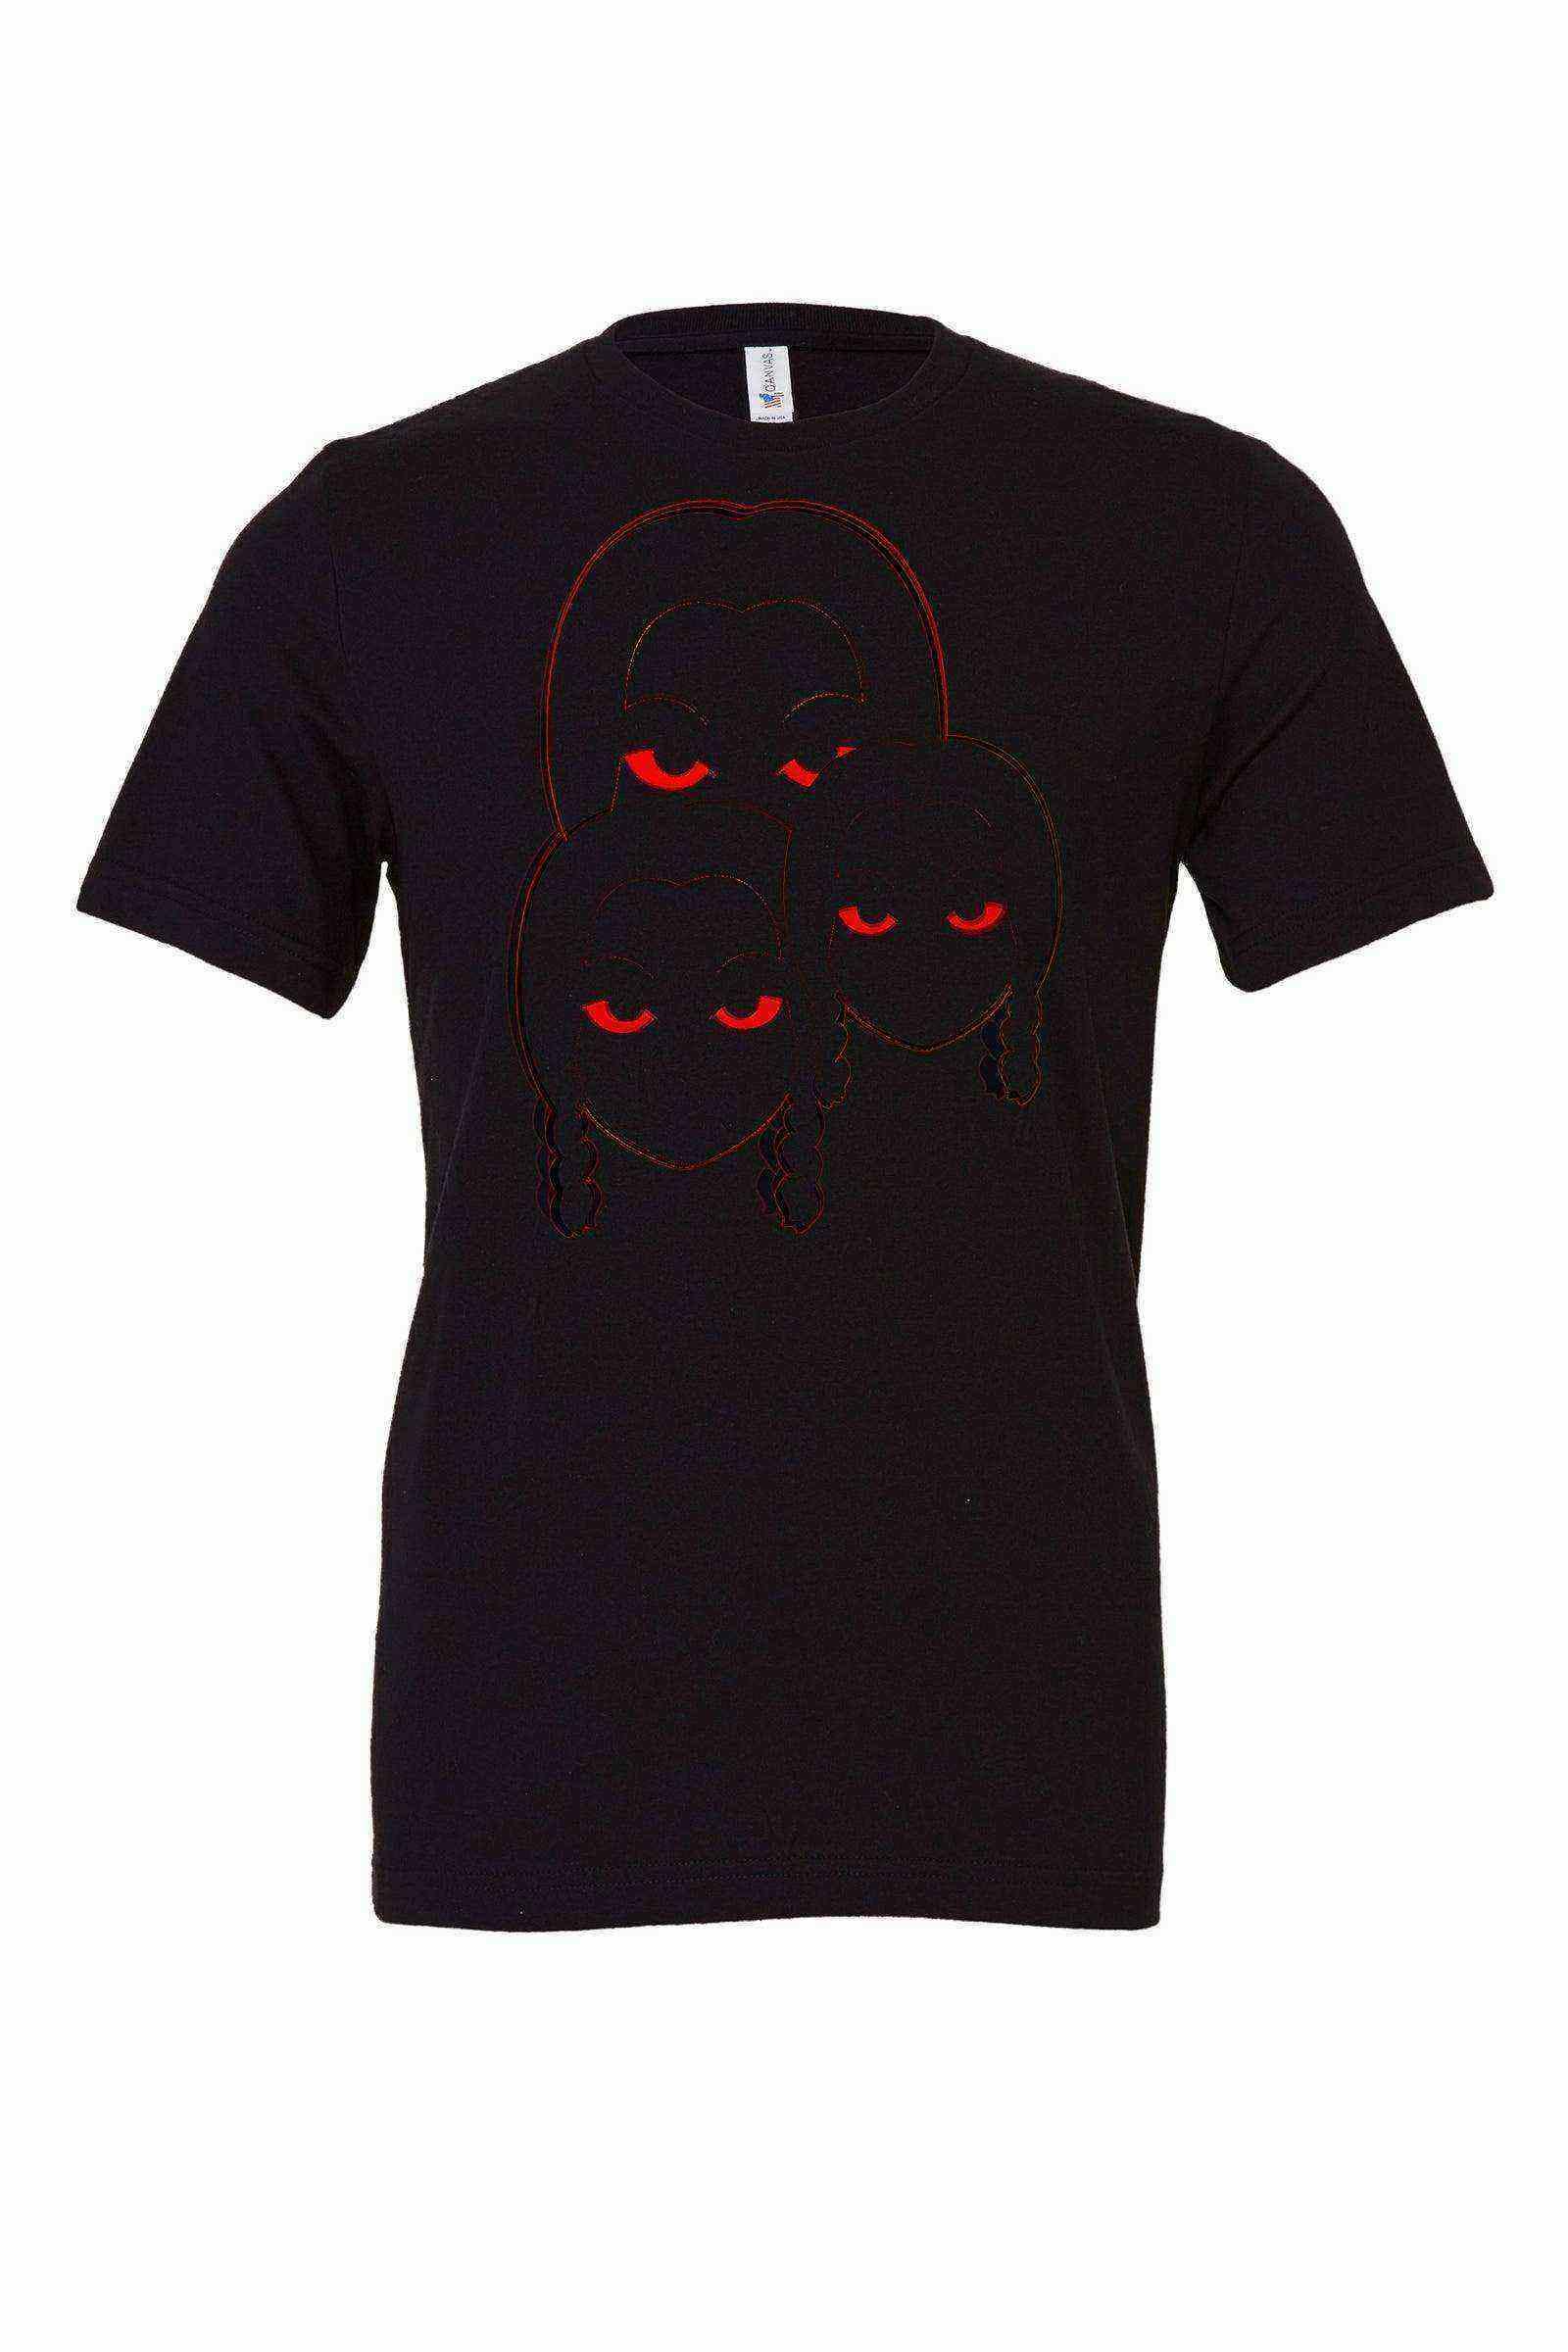 Toddler | Creepy Wednesday Shirt | The Addams Shirt | Red Wednesday - Dylan's Tees